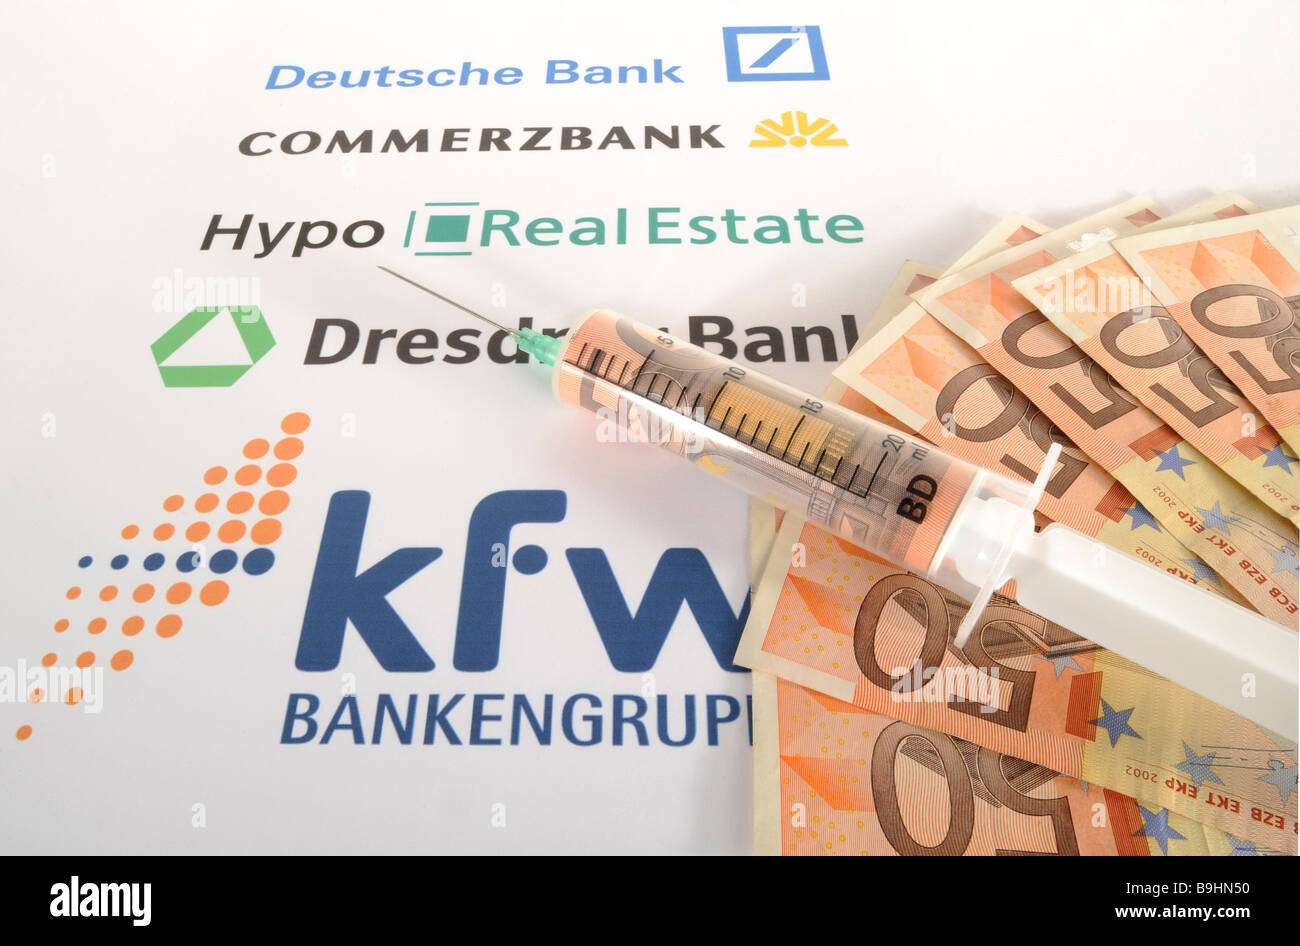 Injection needle on banknotes and bank logos, symbolic picture of cash injection for banks Stock Photo